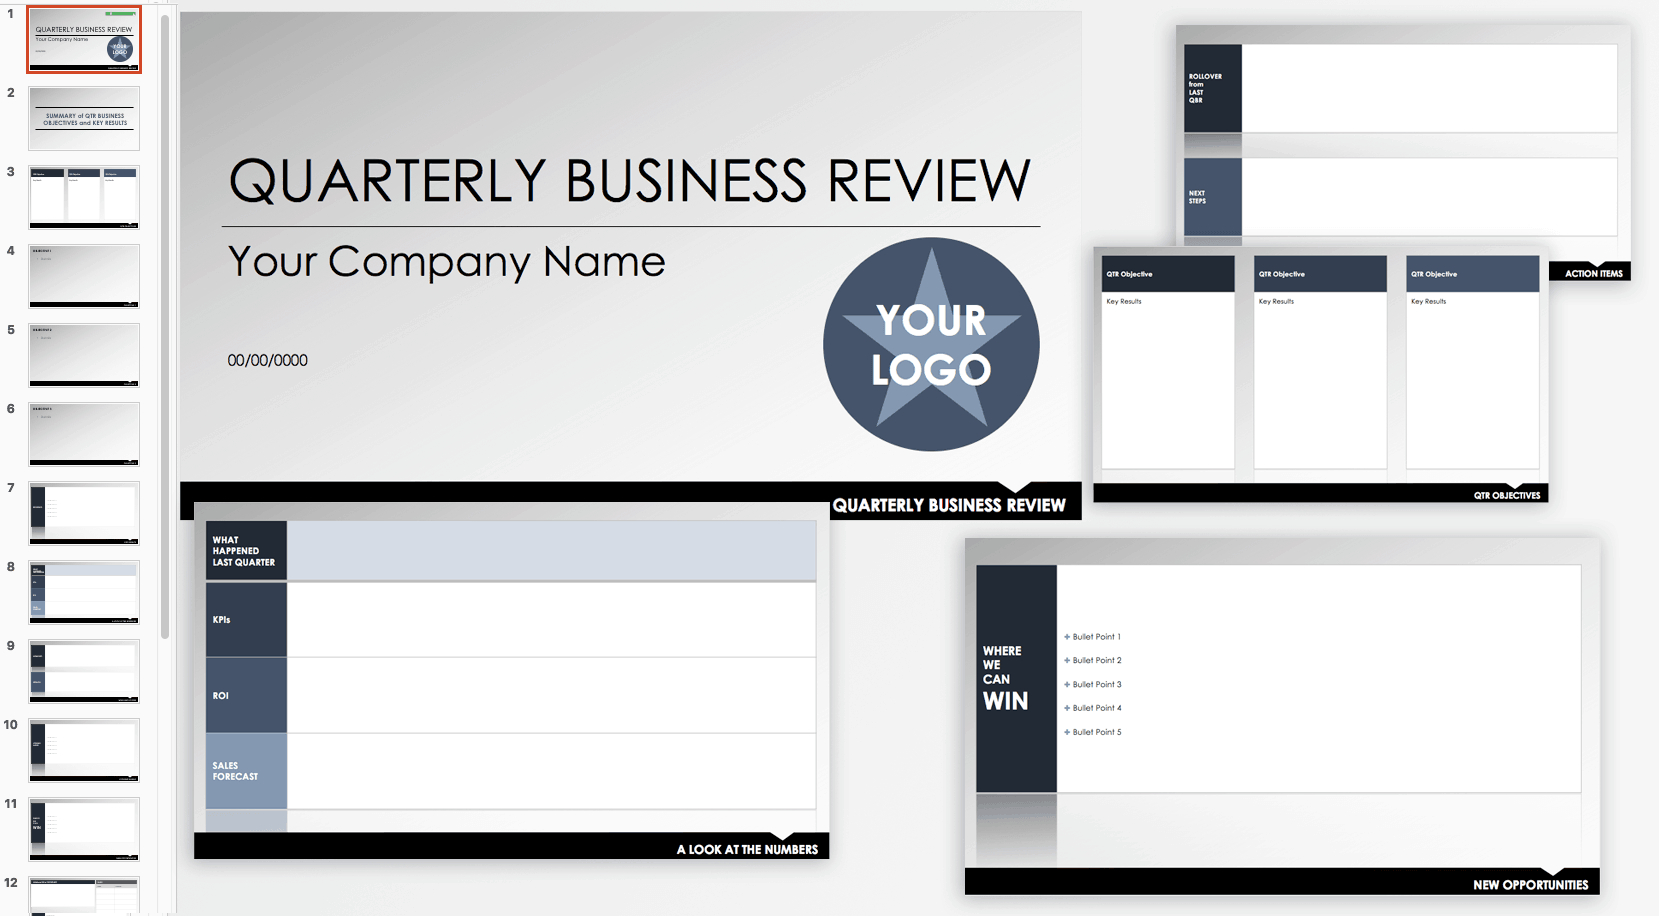 Free Qbr And Business Review Templates | Smartsheet Inside Business Review Report Template